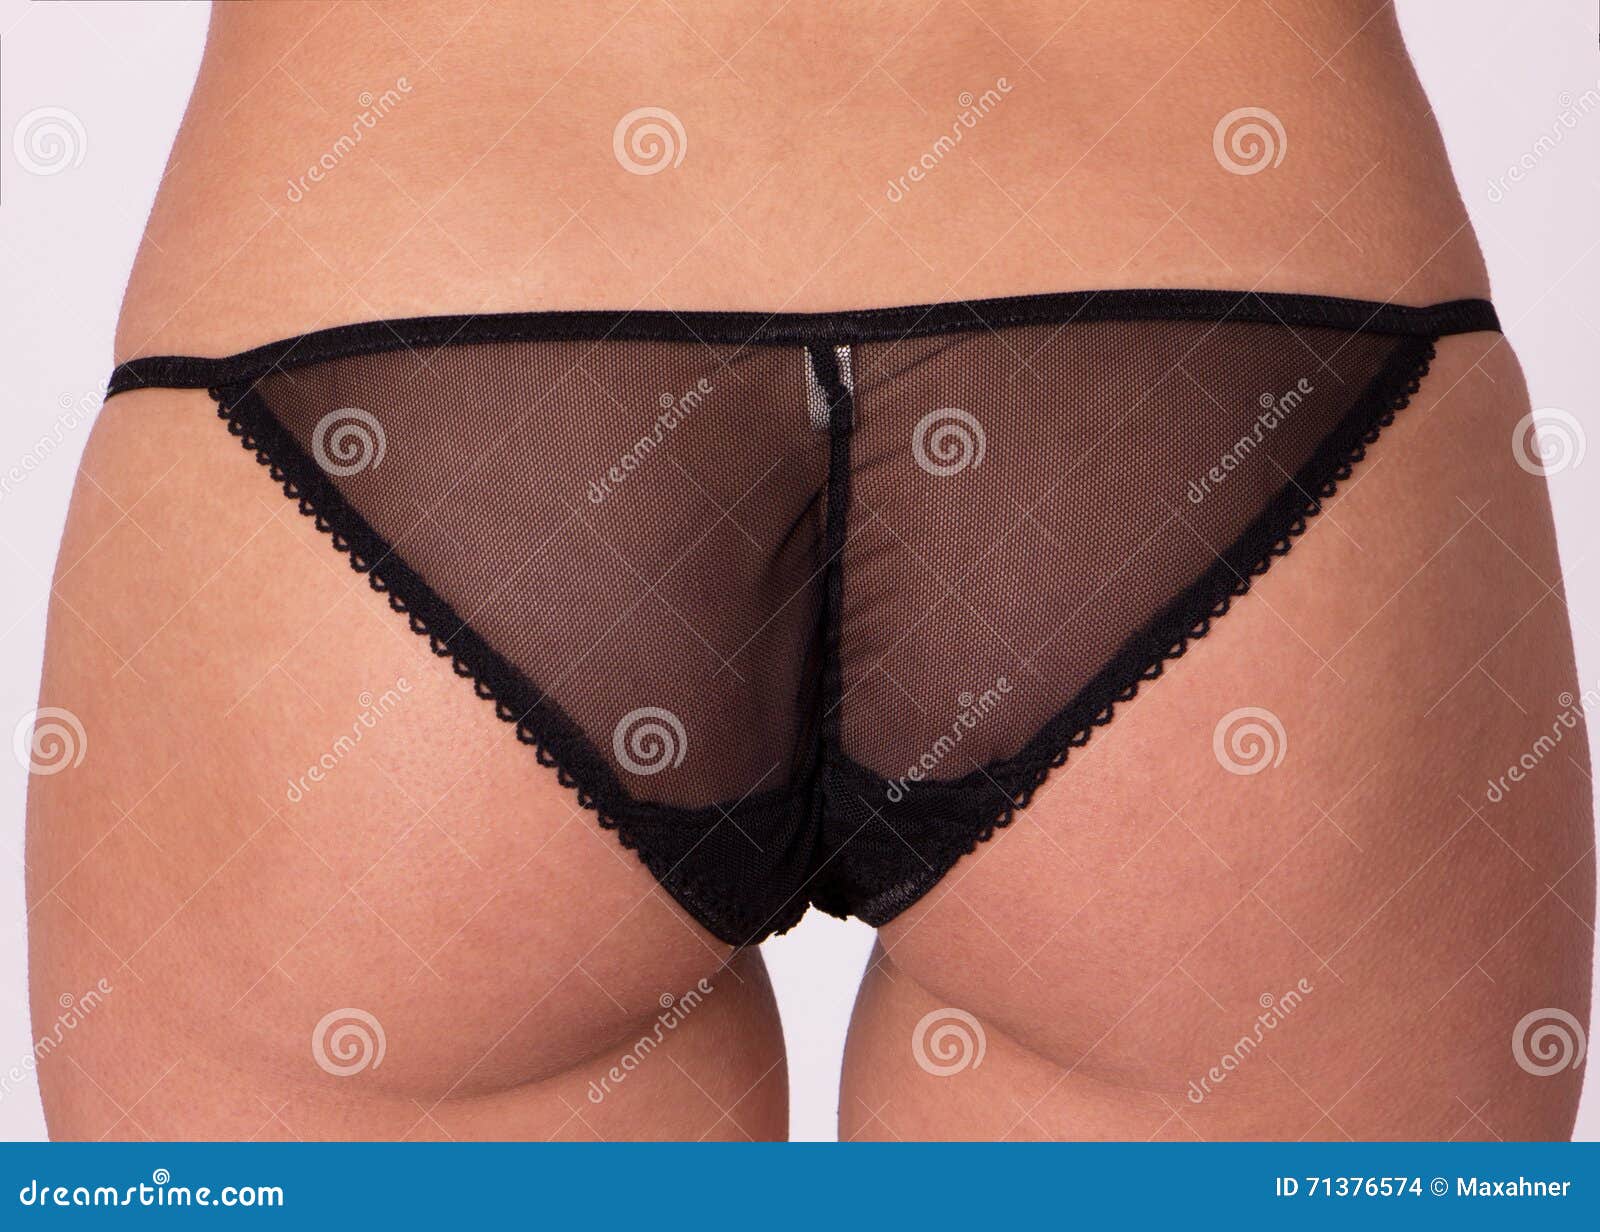 amanda dombrowski recommends See Through Panties Images